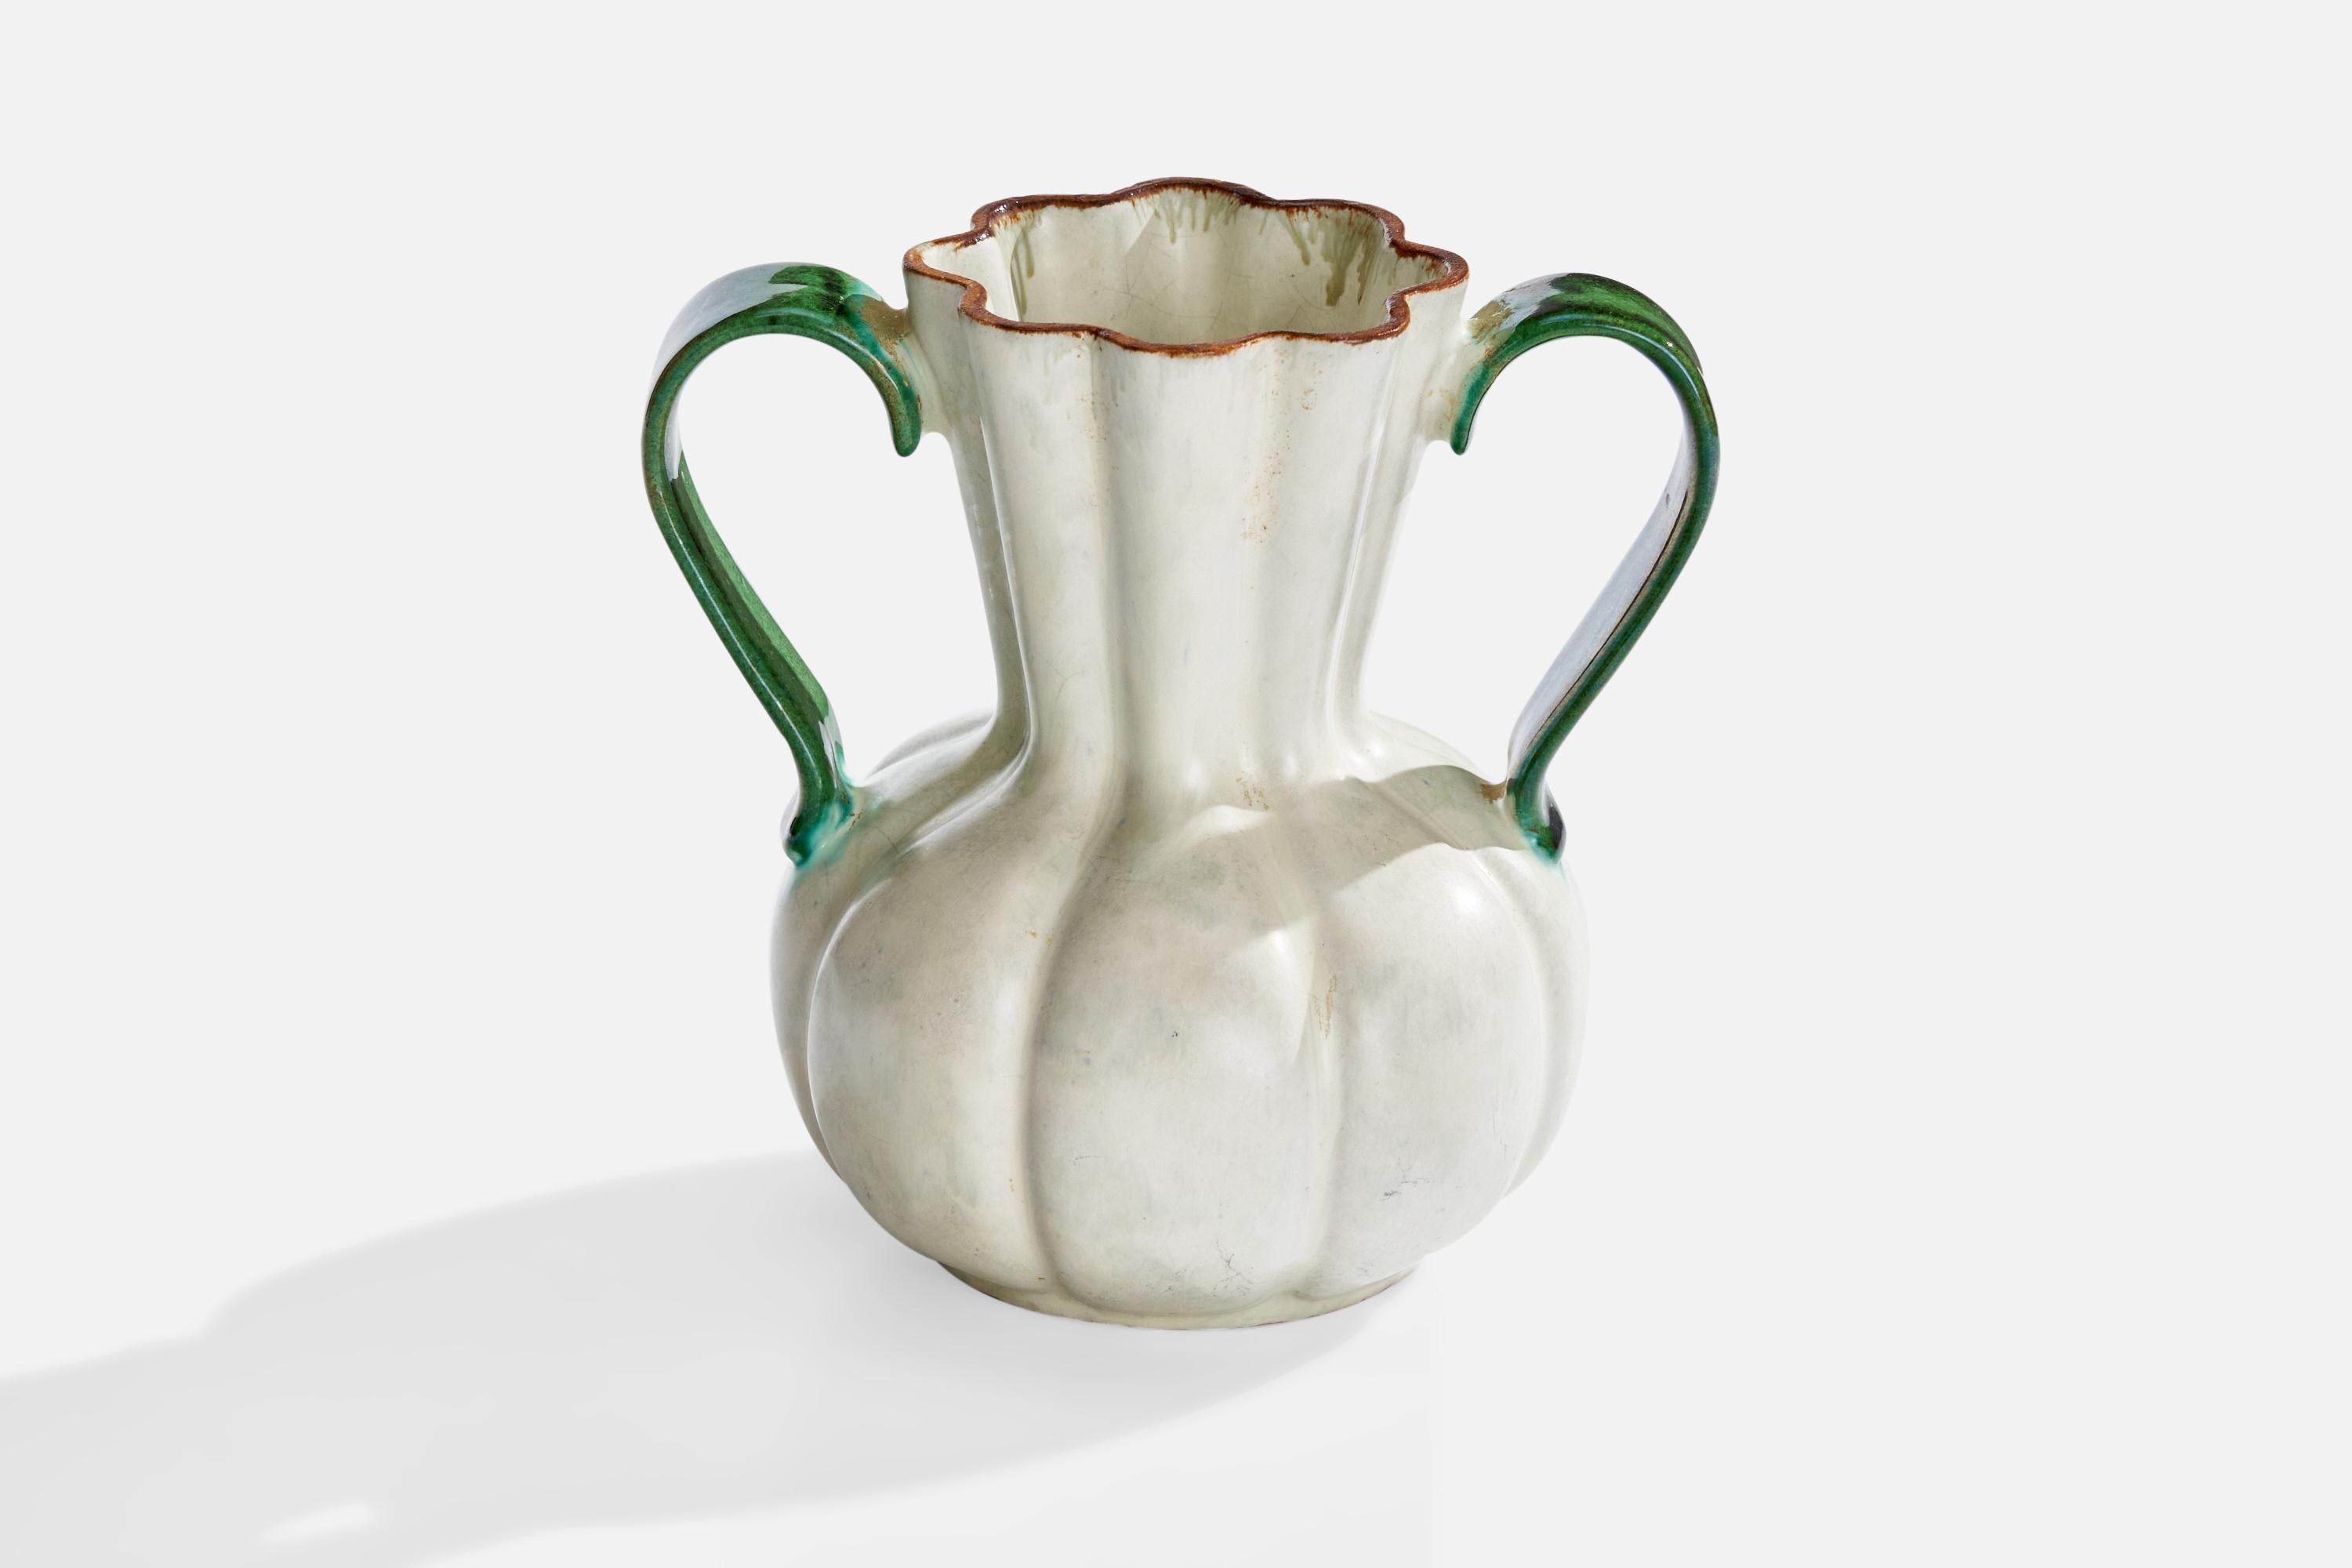 A white and green-glazed earthenware vase designed and produced by Upsala Ekeby, Sweden, 1930s.